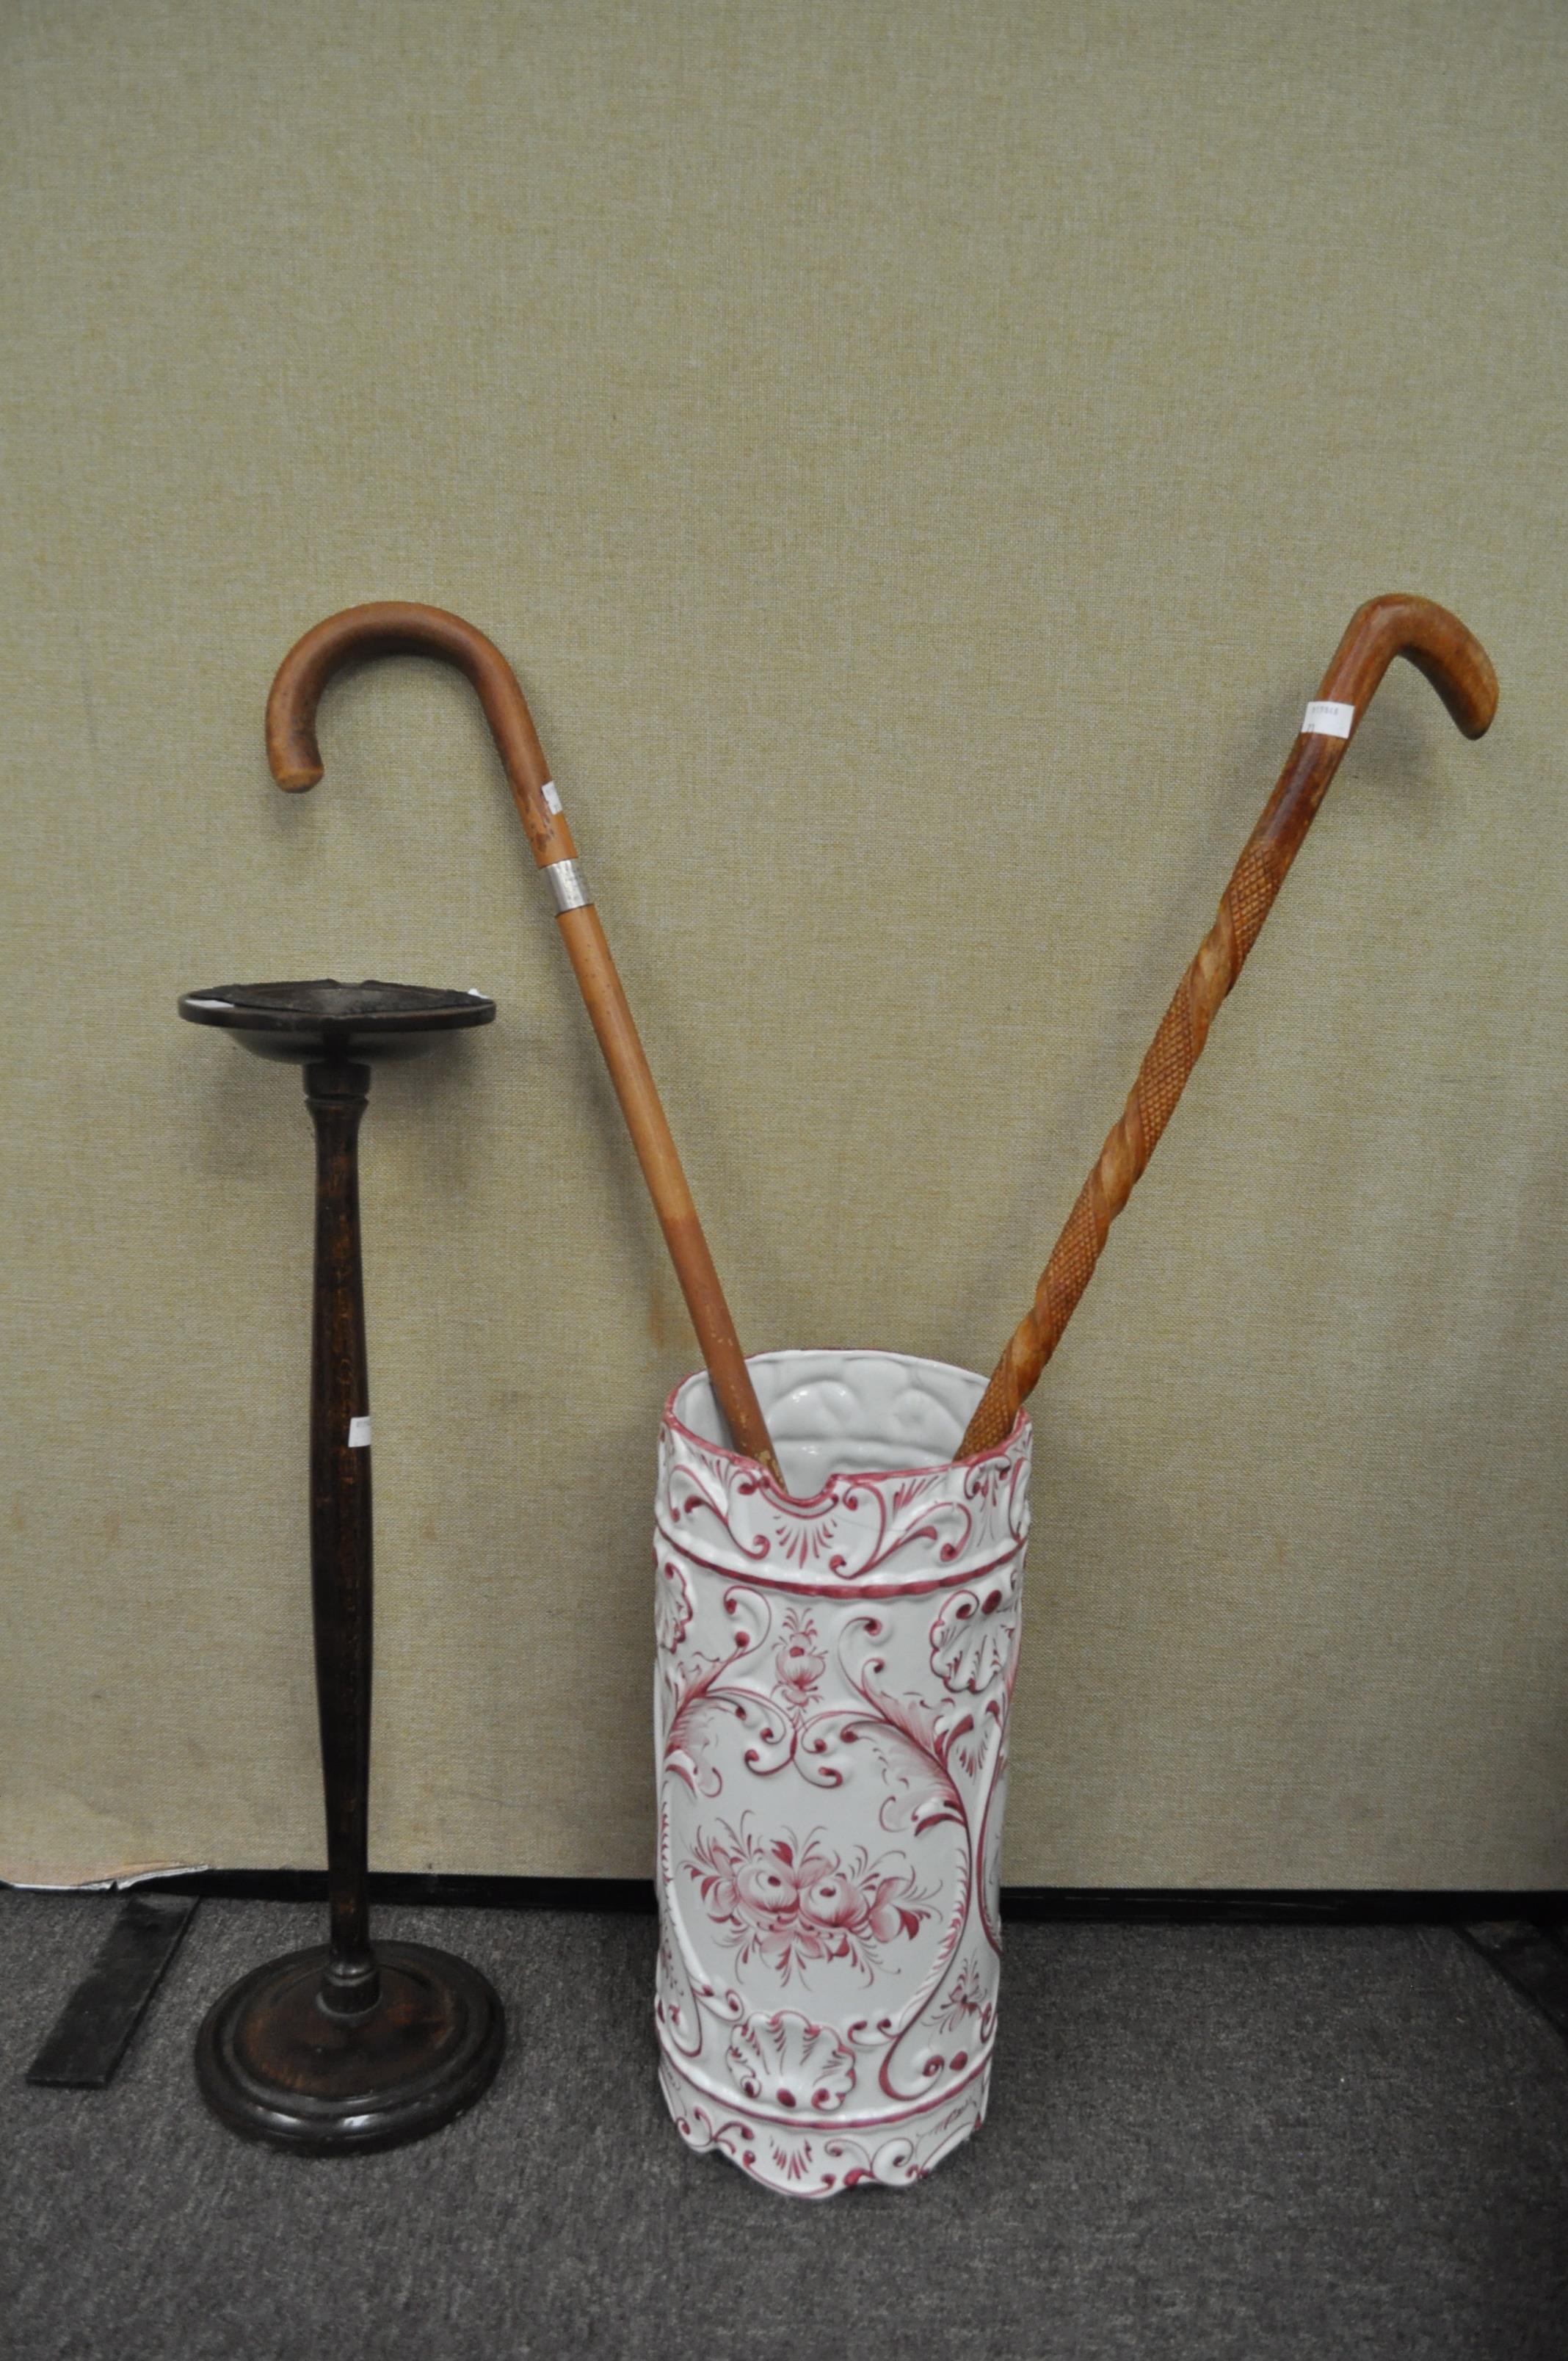 An umbrella stand and walking stick